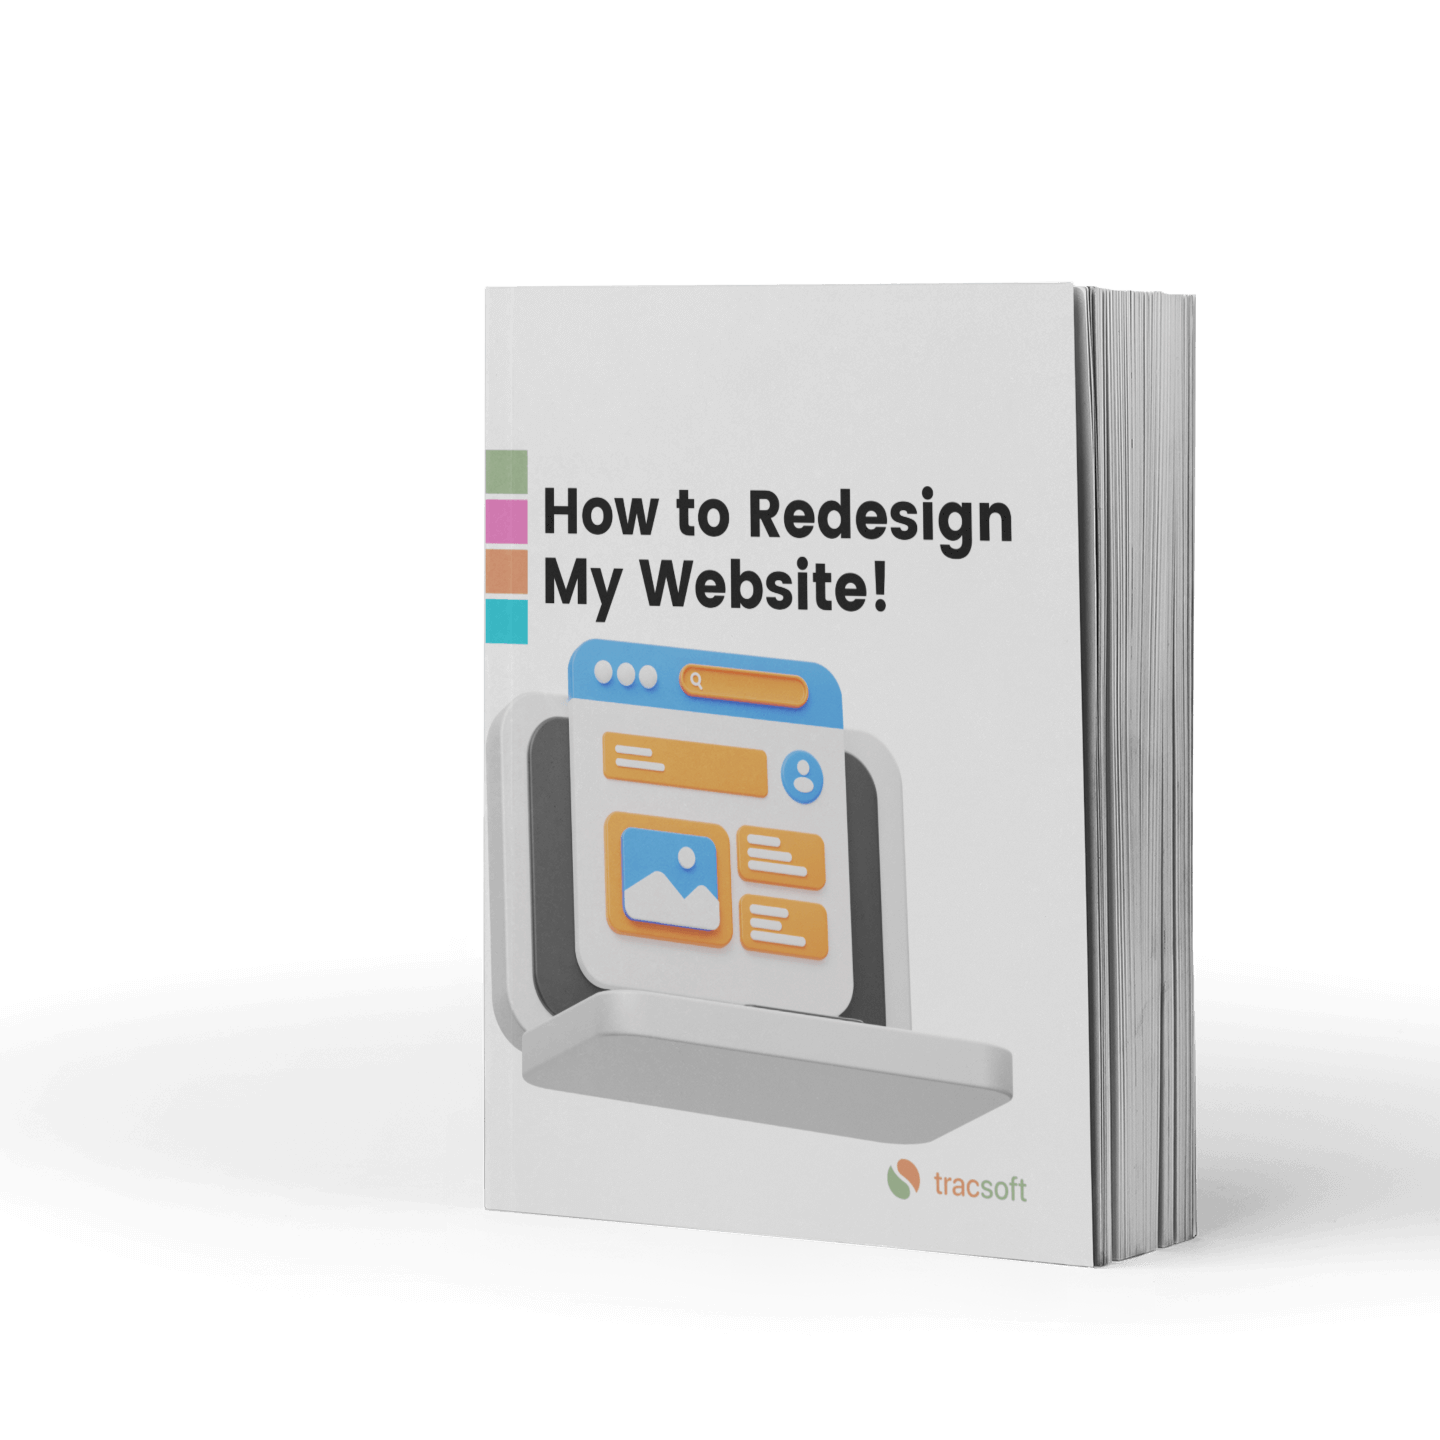 how to redesign your website ebook from tracsoft